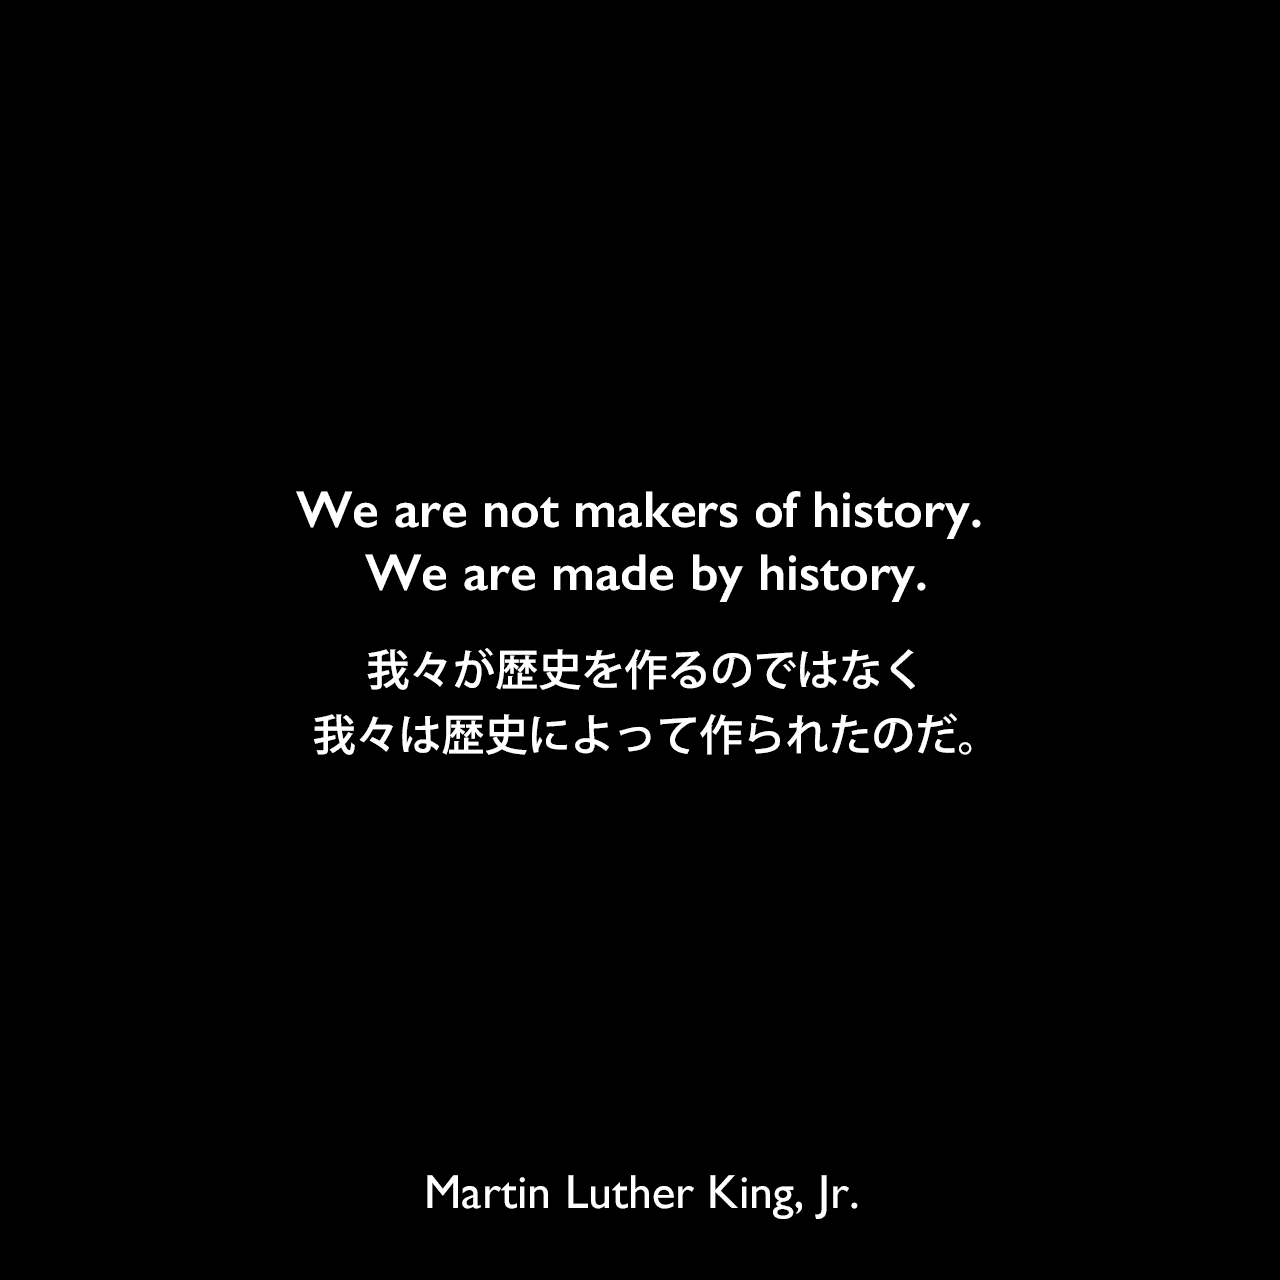 We are not makers of history. We are made by history.我々が歴史を作るのではなく、我々は歴史によって作られたのだ。Martin Luther King, Jr.